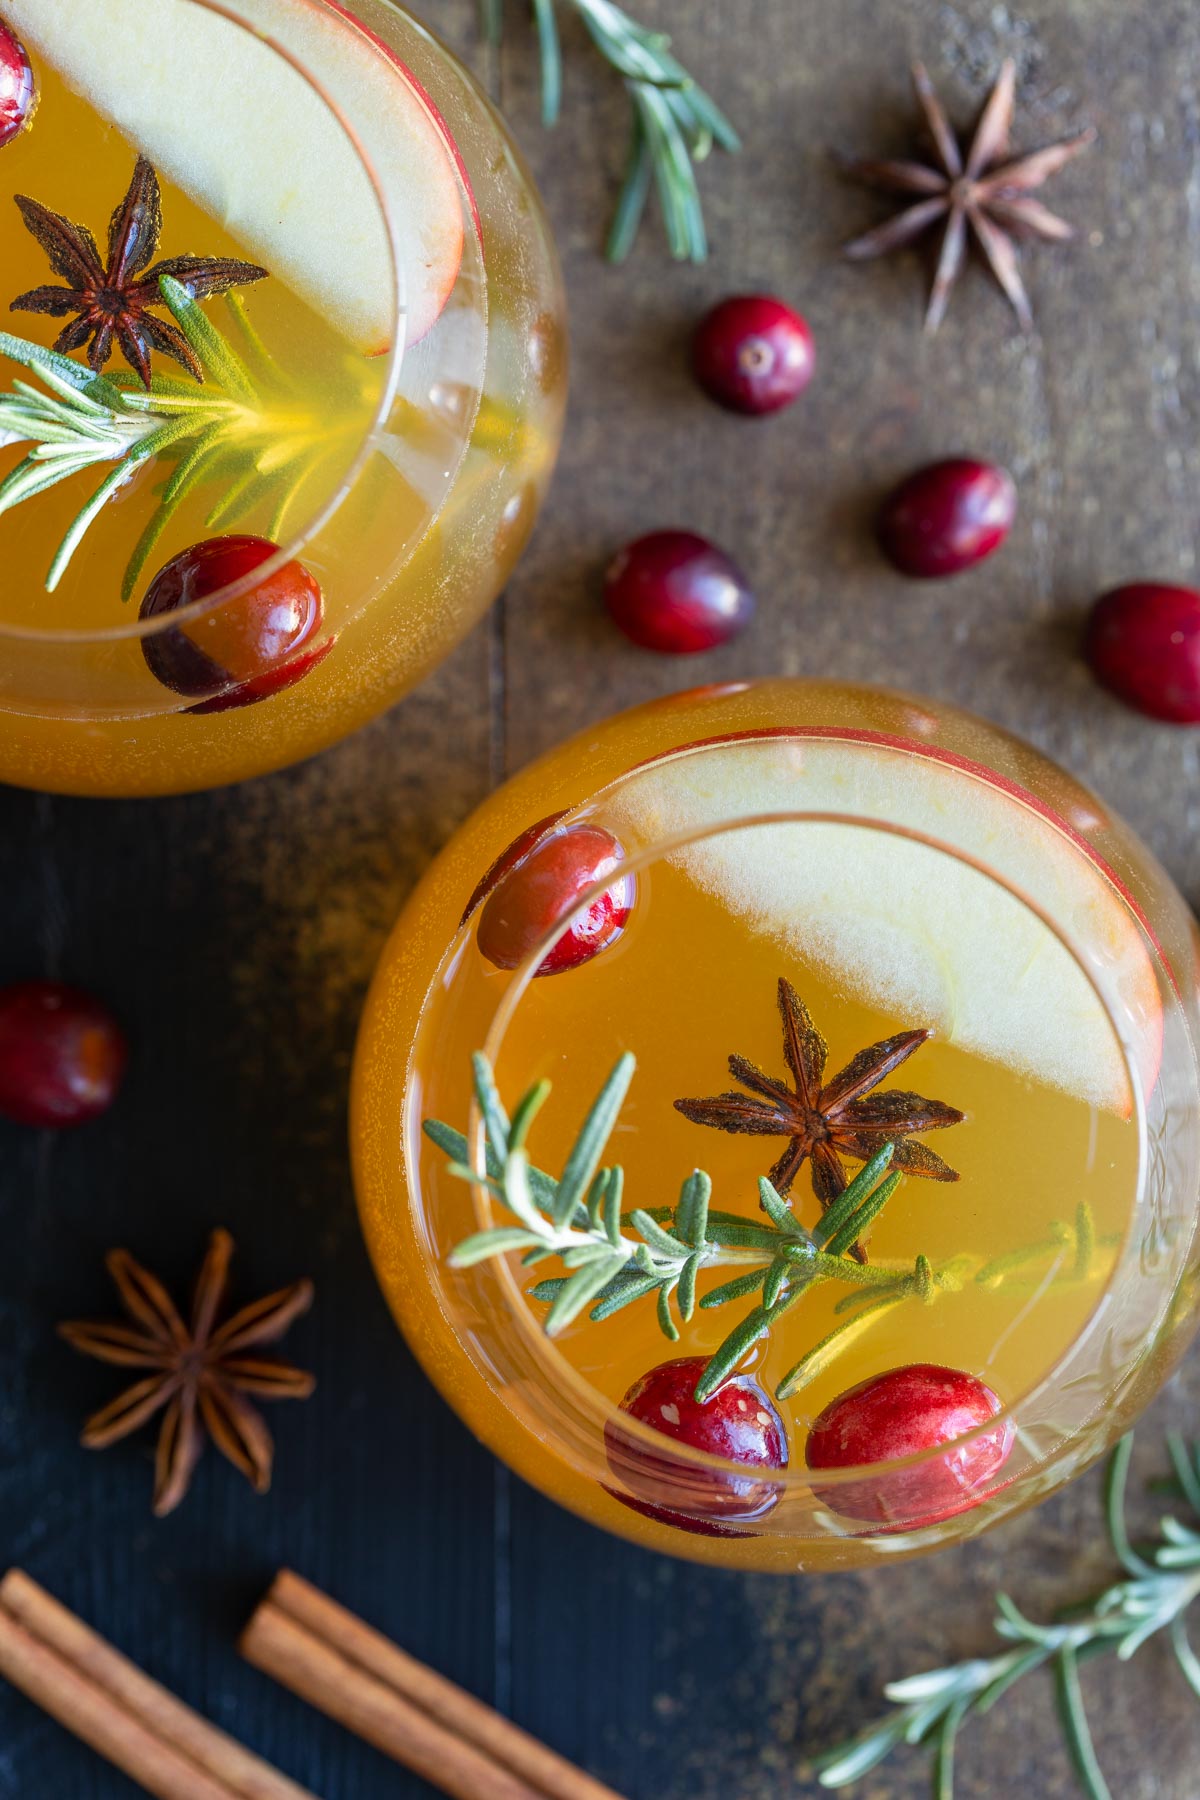 Overhead view of two glasses of sangria garnished with rosemary sprigs.